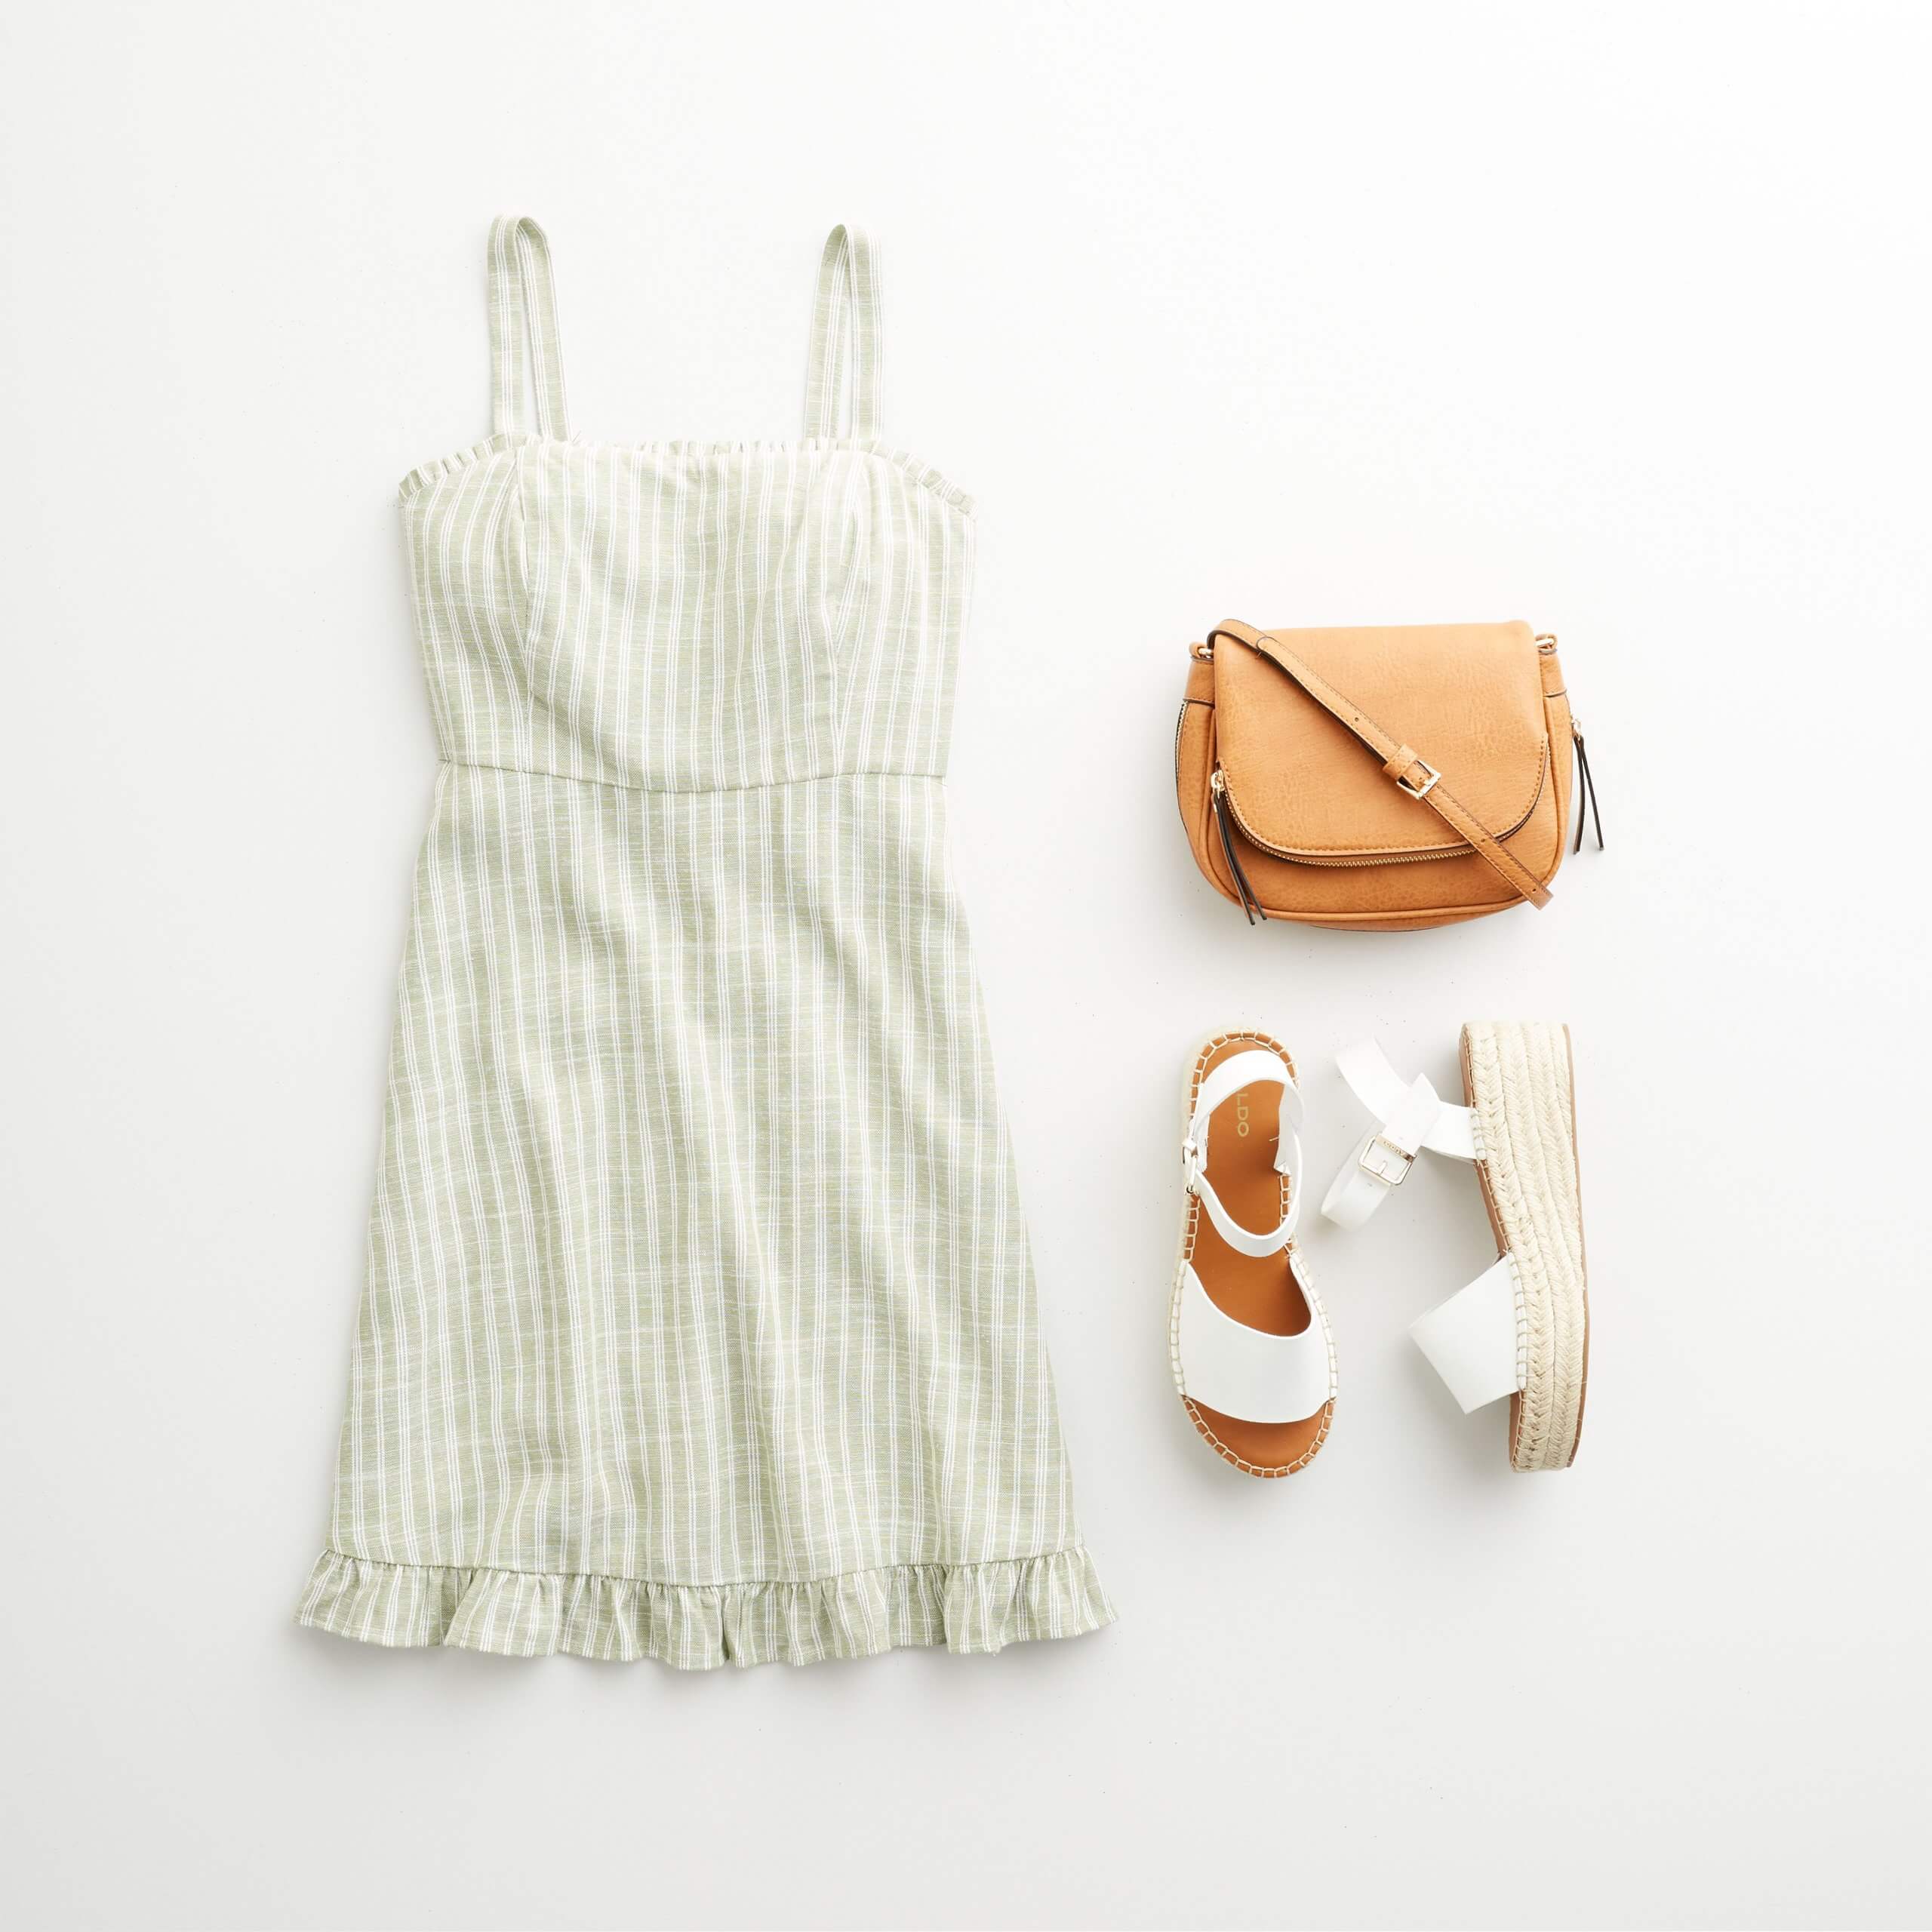 Stitch Fix women's outfit laydown featuring green and white striped sundress, tan crossbody bag and white wedges.